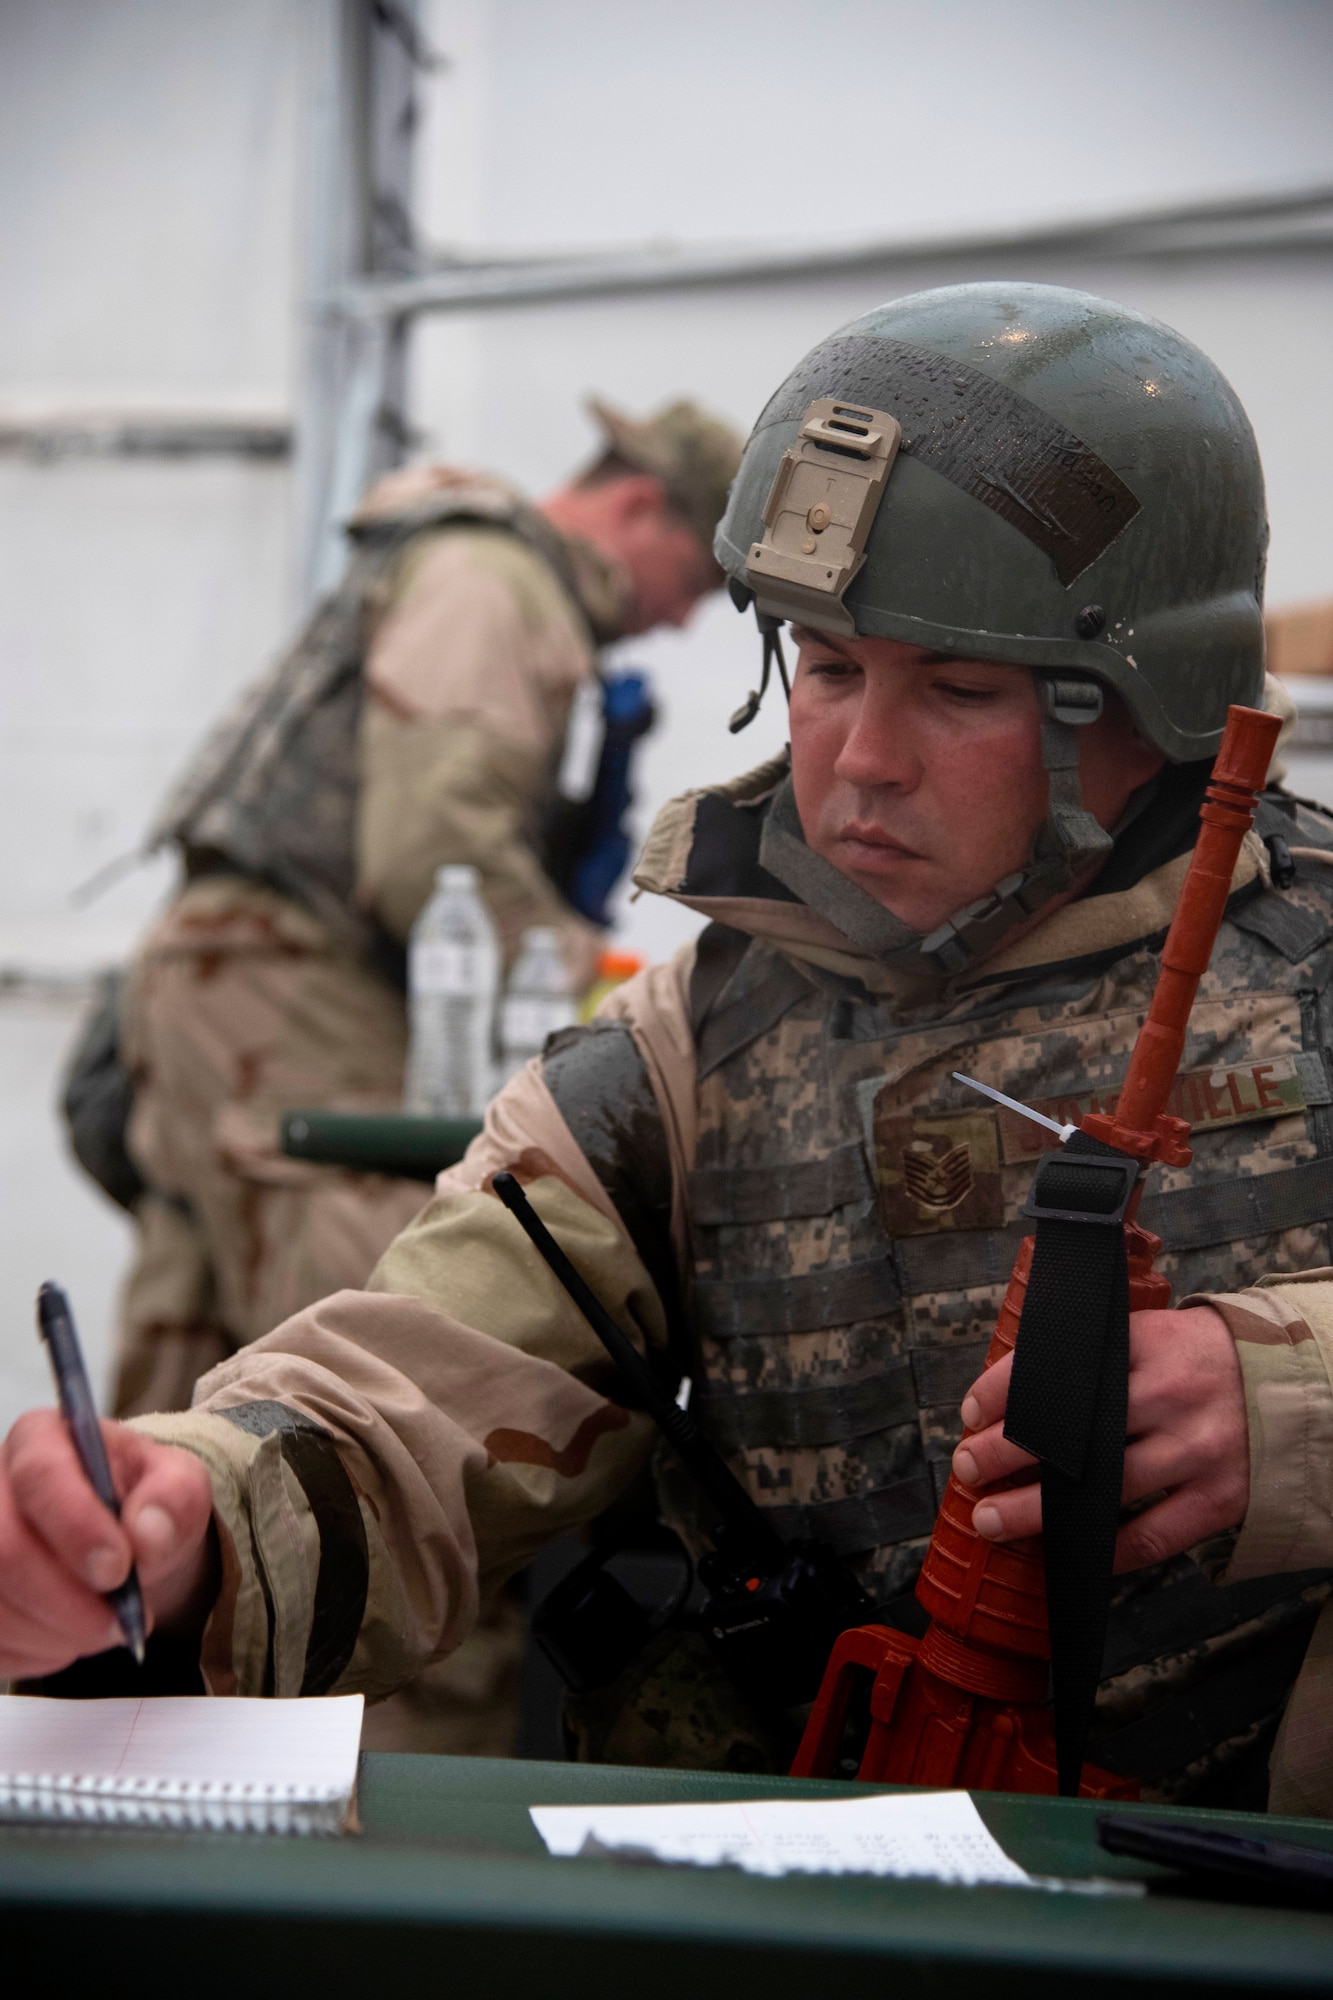 Tech. Sgt. Jason Jumonville, 319th logistics Readiness Squadron fuels operations section chief, notes the names of injured airmen following a simulated attack May 22, 2019, during exercise Summer Viking 19-01 on the Air National Guard Base in Fargo, North Dakota. The 4-day exercise consisted of deploying Grand Forks Air Force Base airmen to a forward operating base, setting up a temporary camp and responding to threats of chemical and biological contamination or adversaries. (U.S. Air Force photo by Senior Airman Elora J. Martinez)